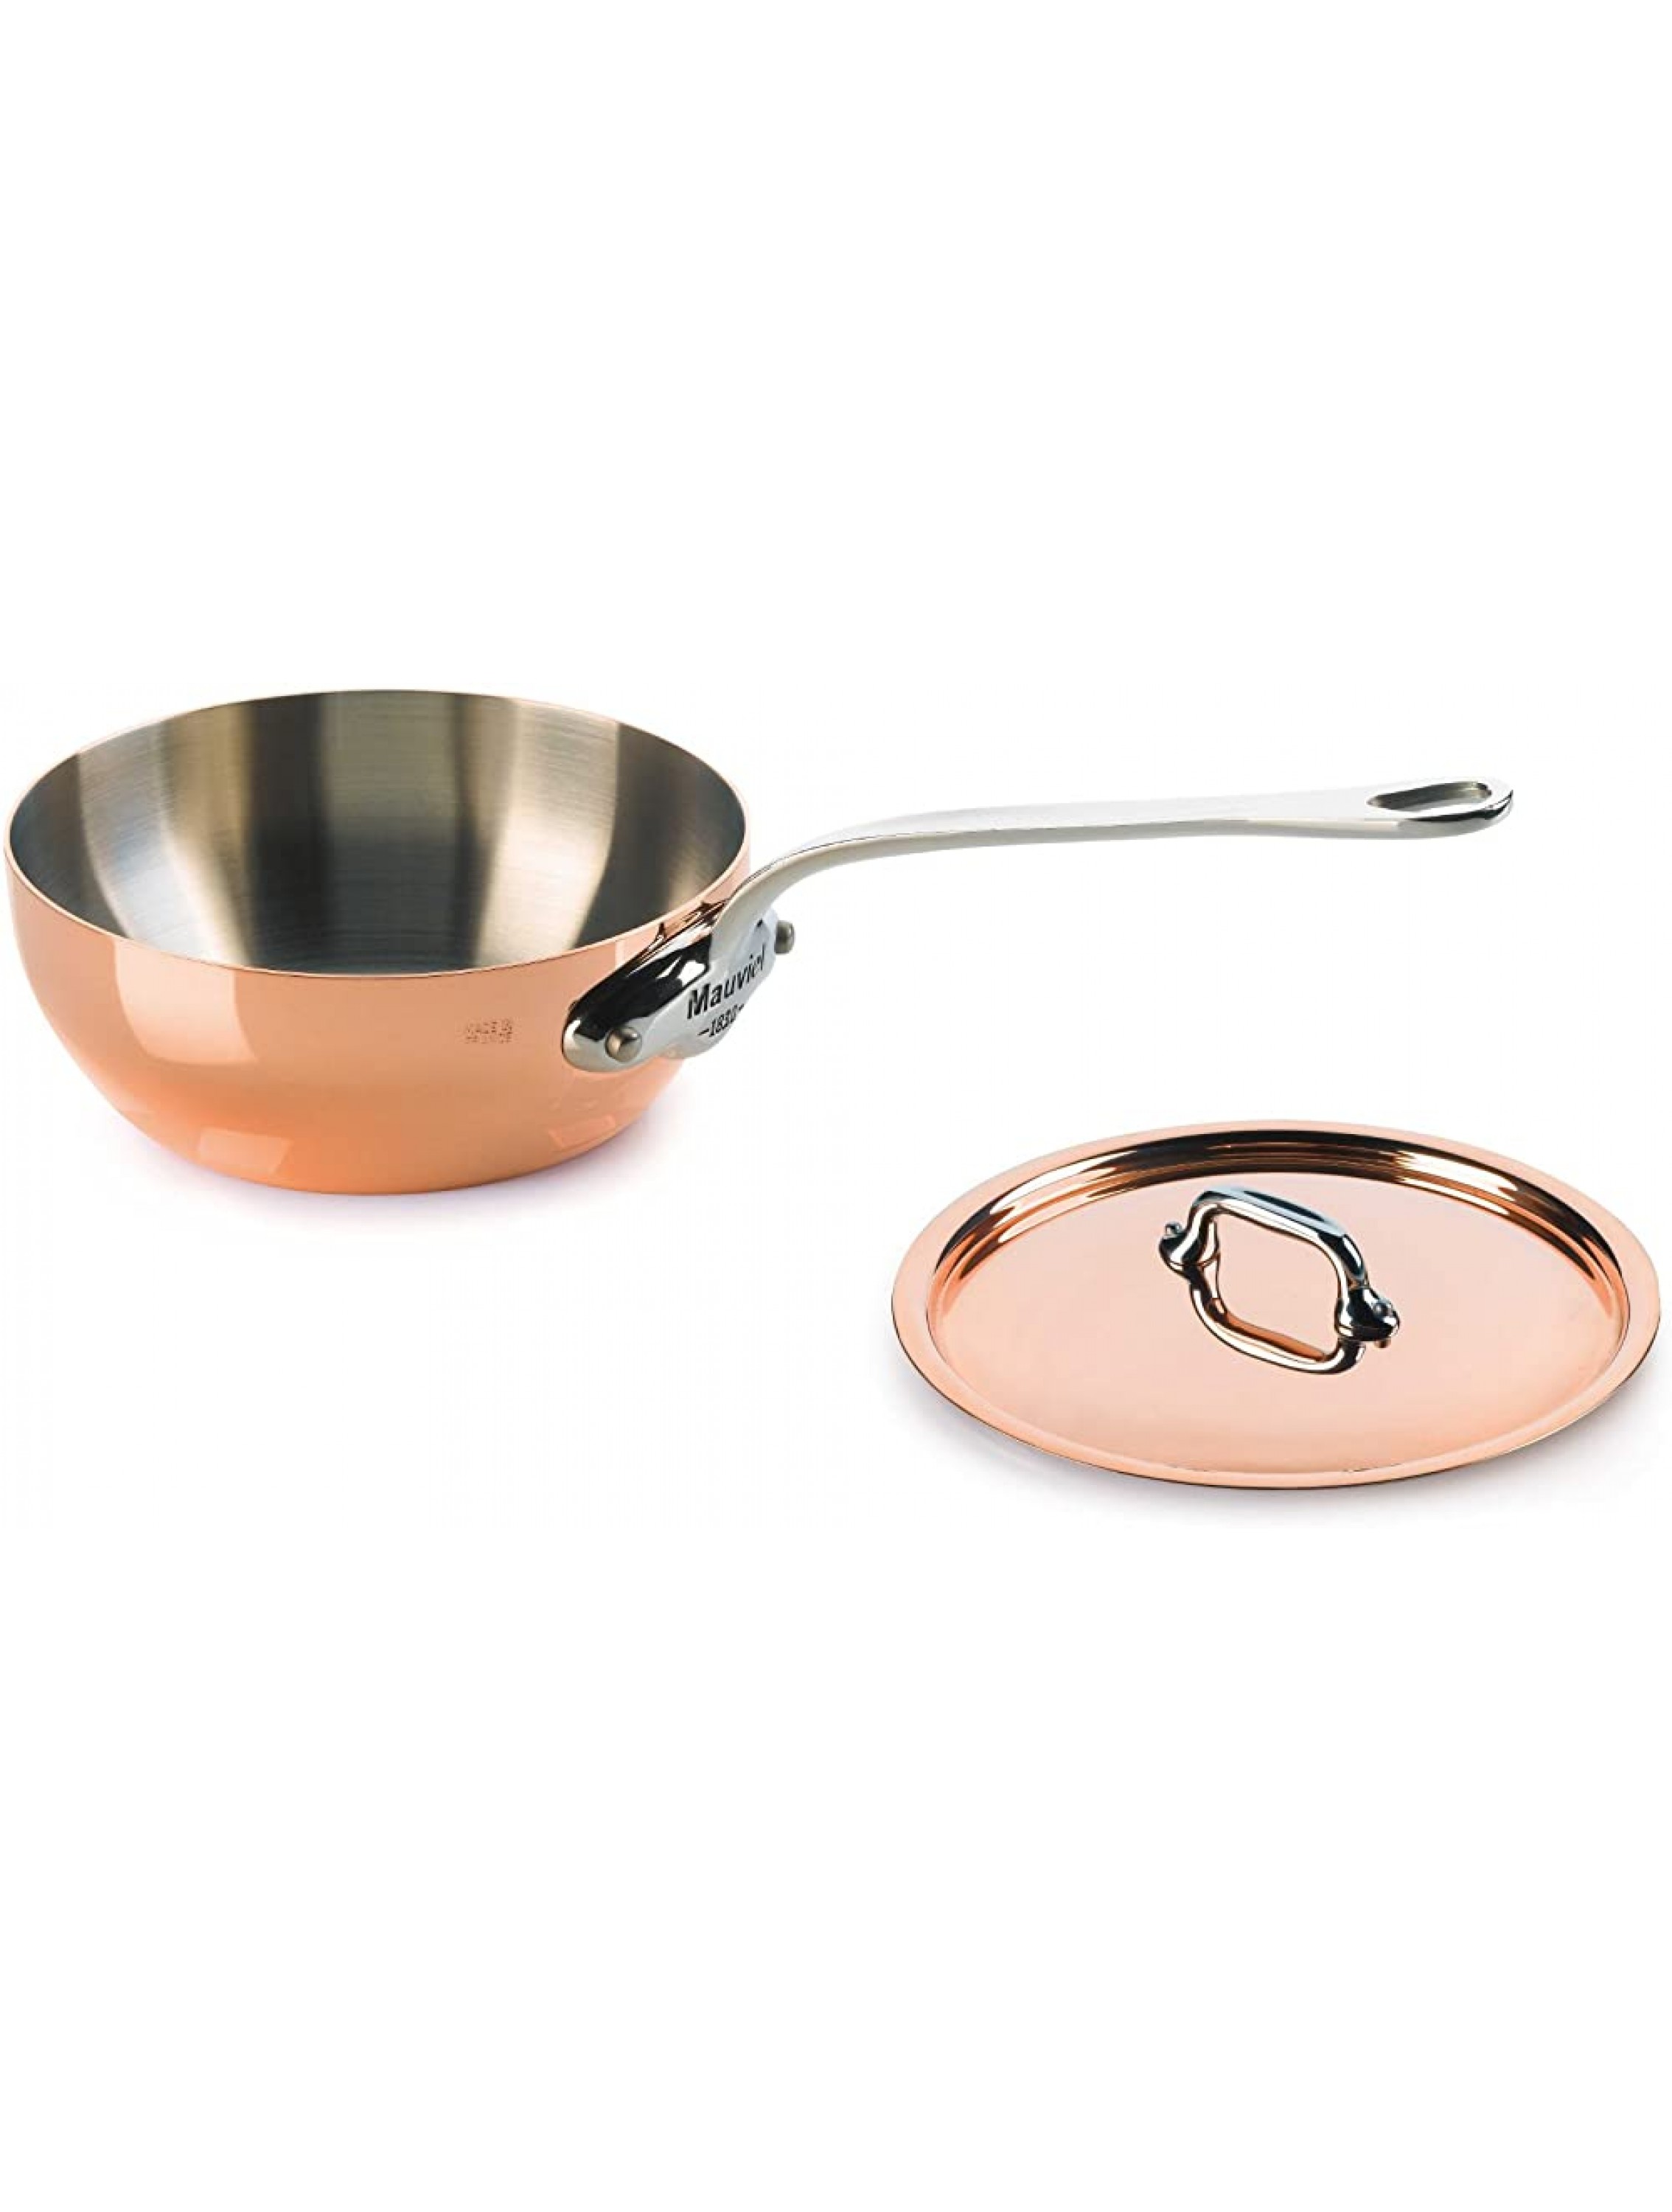 Mauviel Made In France M'Heritage Copper 150s 1.7-Quart Splayed Saute Pan and Lid with Cast Stainless Steel Handle - B950NESH2